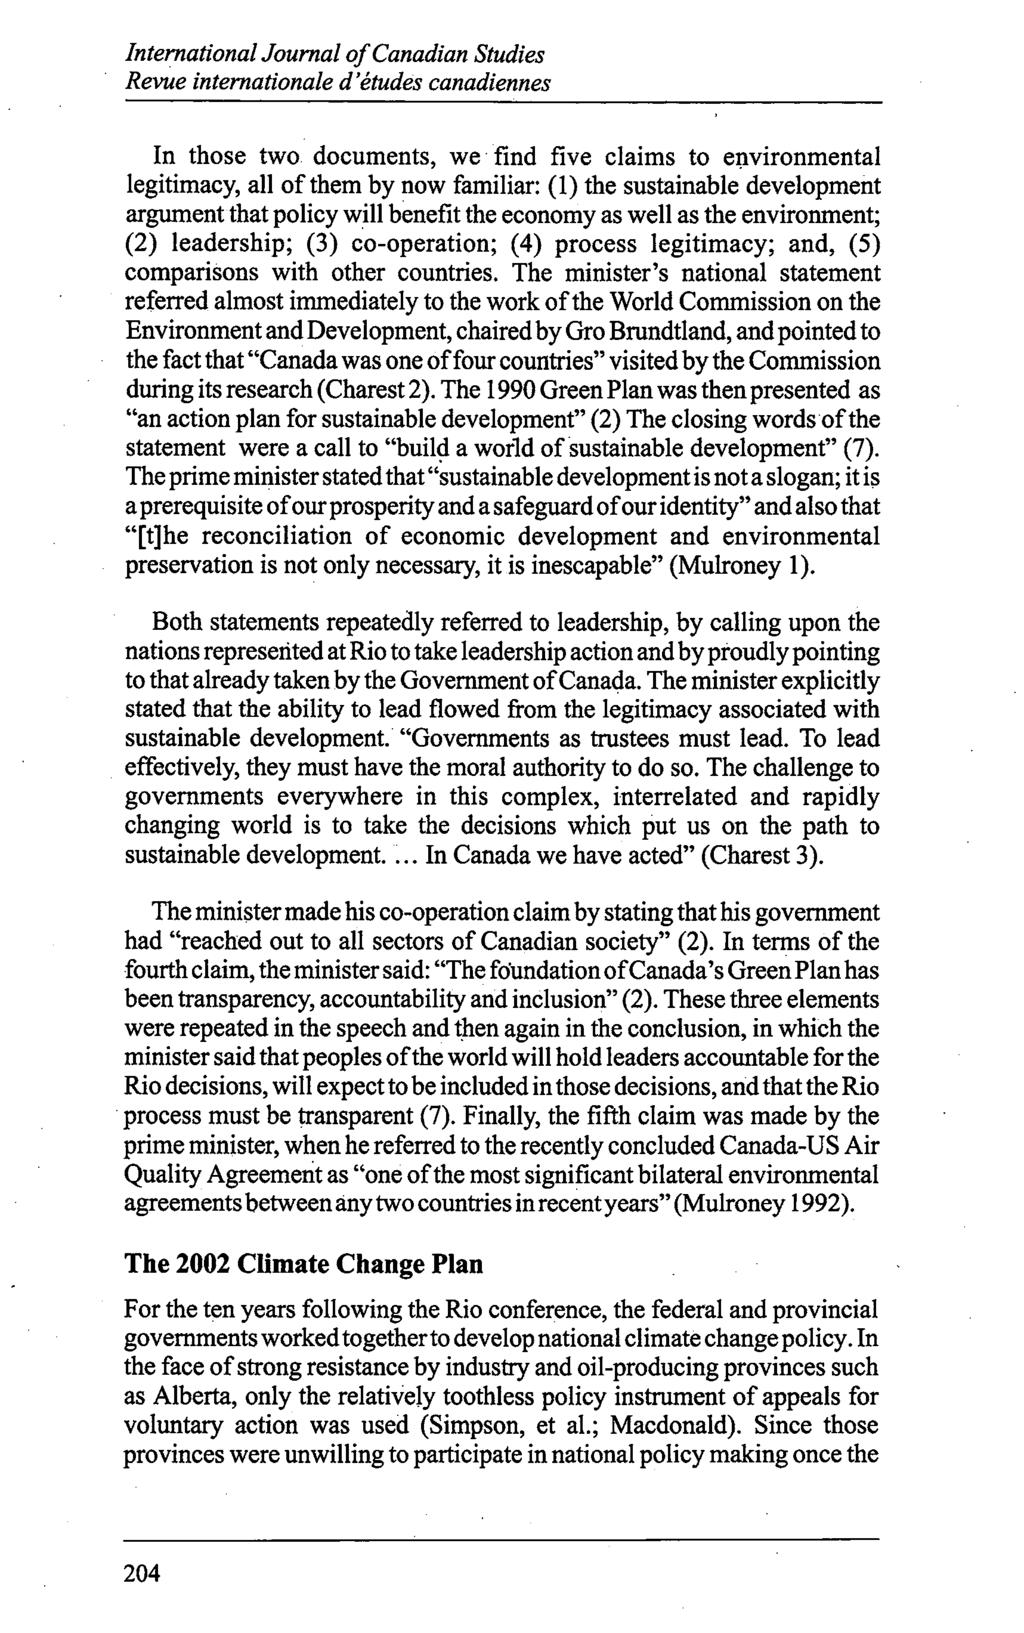 InternationalJournal of Canadian Studies Revue internationale d'études canadiennes In those two documents, we find five claims to environmental legitimacy, all of them by now familiar: (1) the